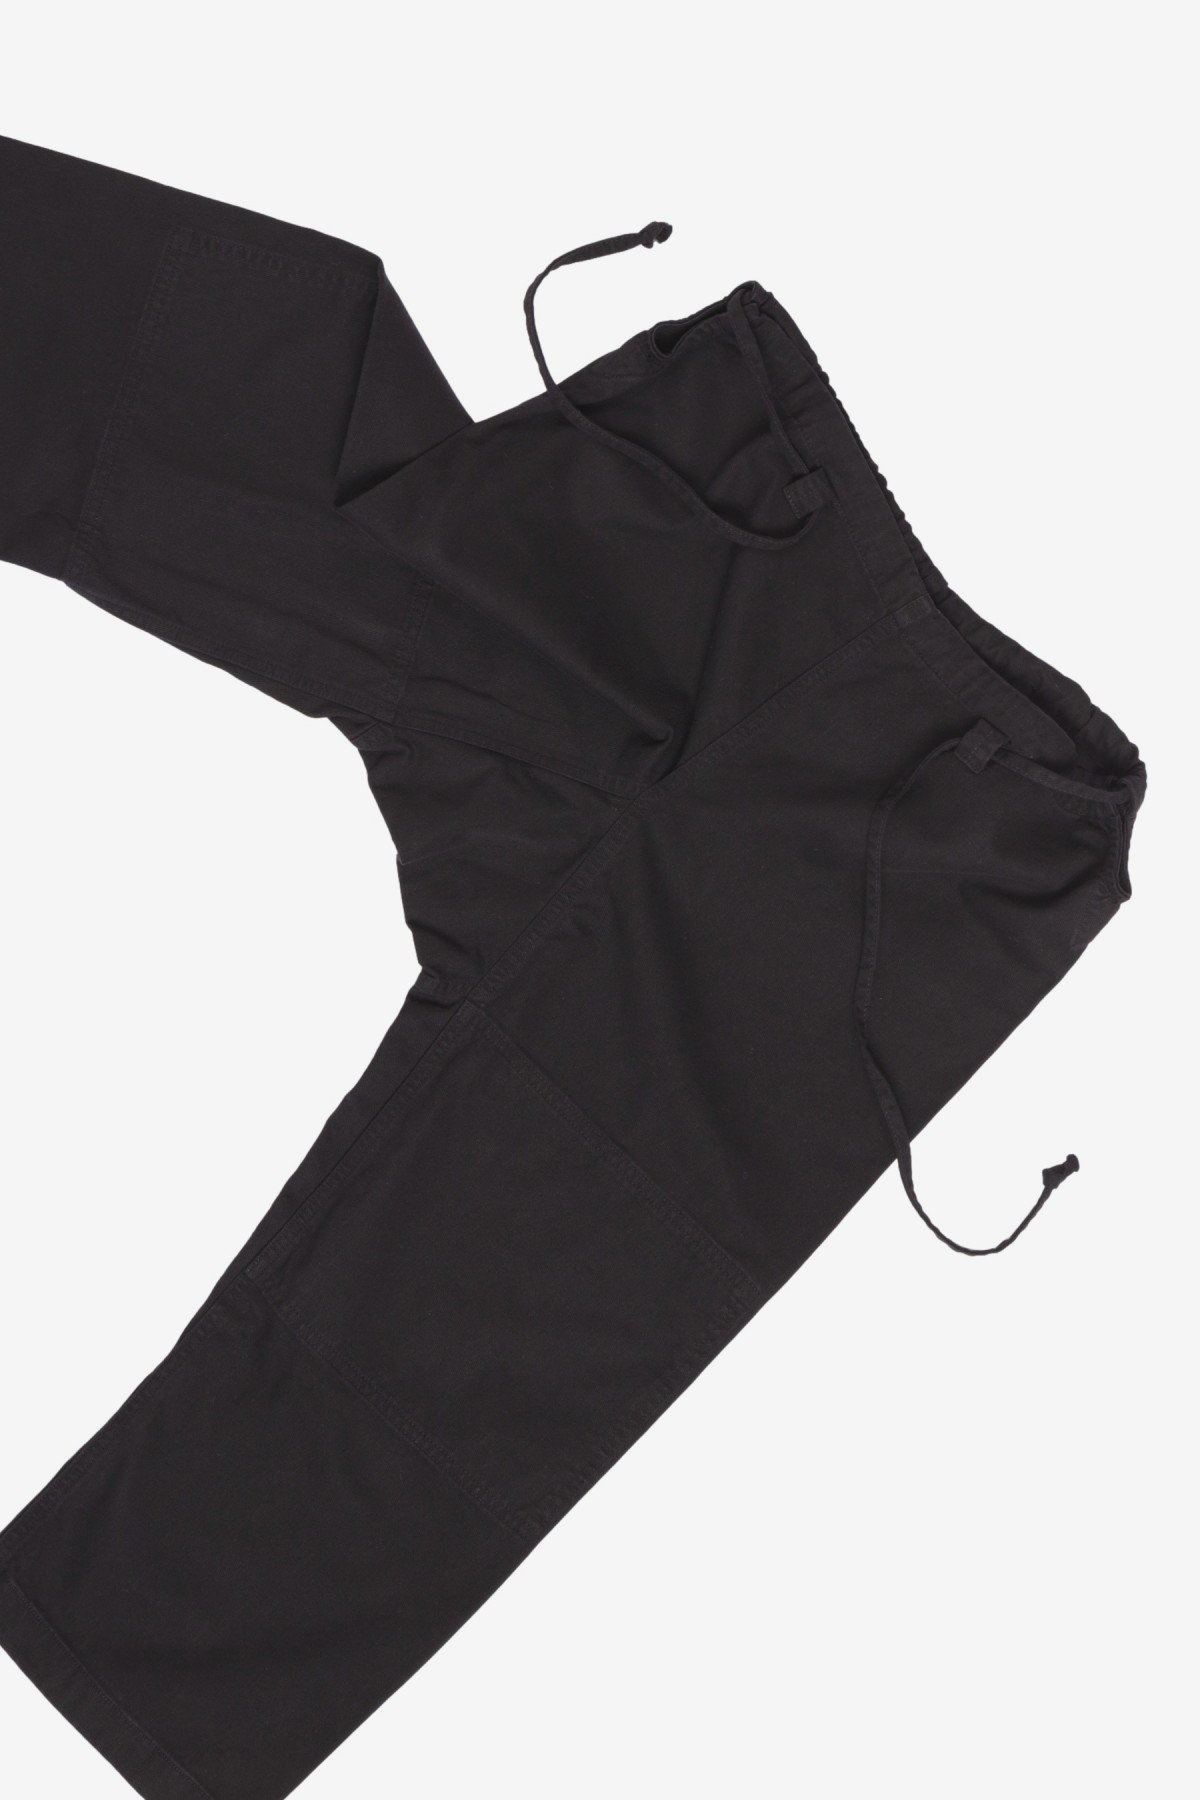 Gil Rodriguez The Lou Pant in Black